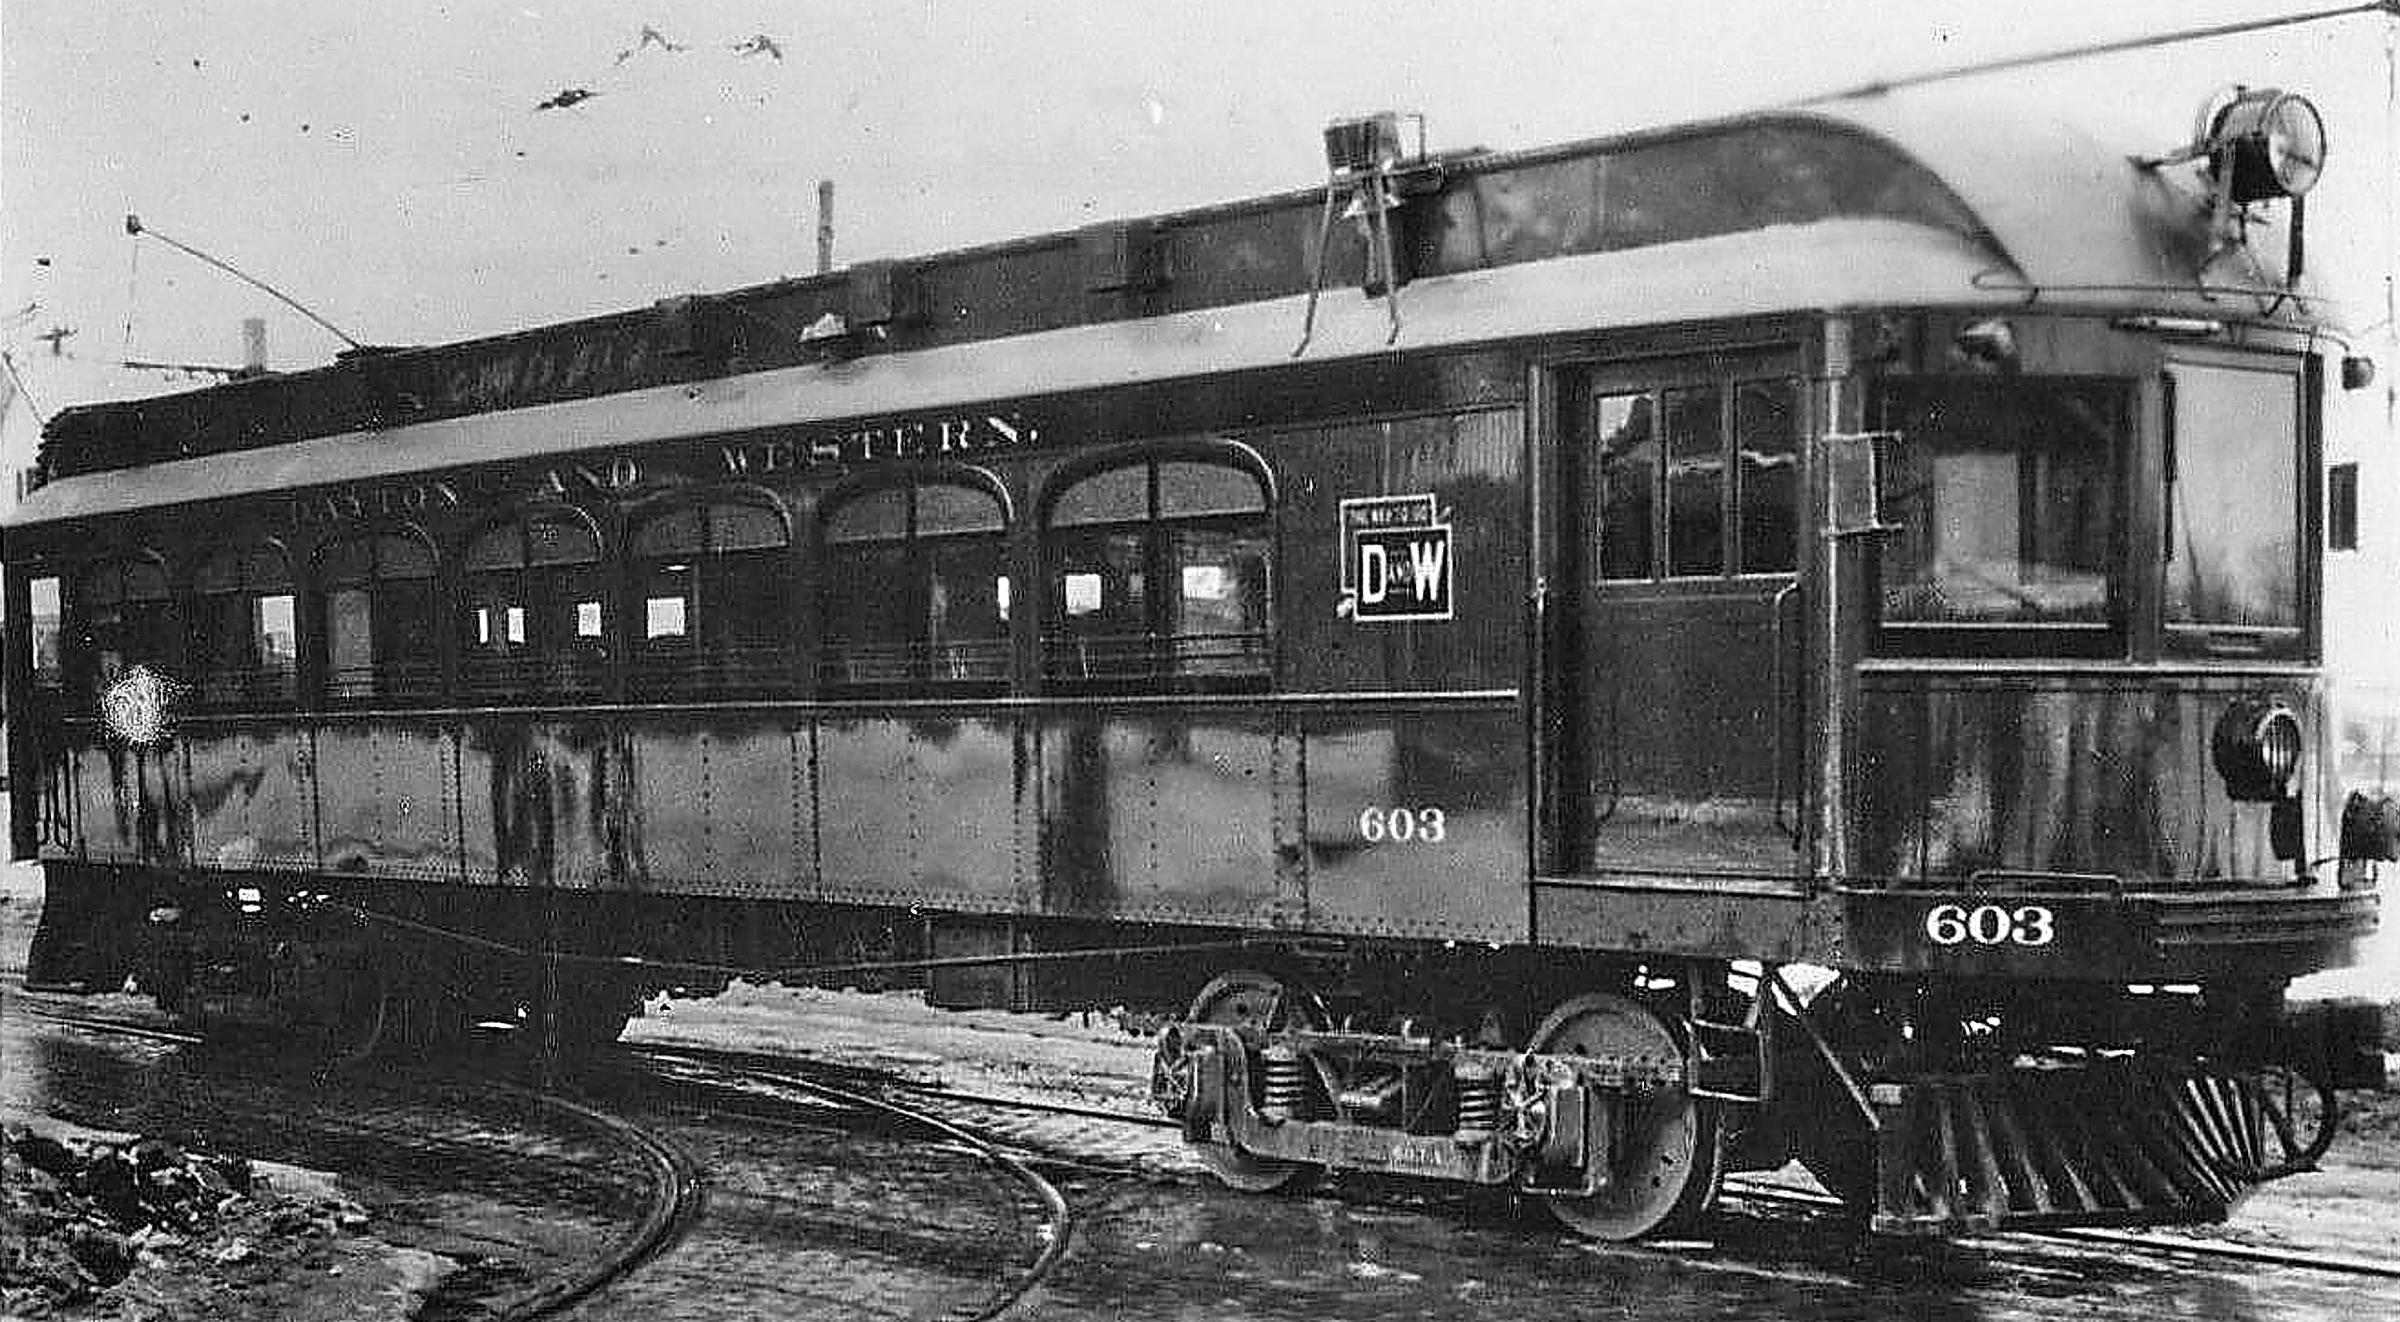 0001_DAYTON-AND-WESTERN-TRACTION-CO-Trolley-at-DAYTON